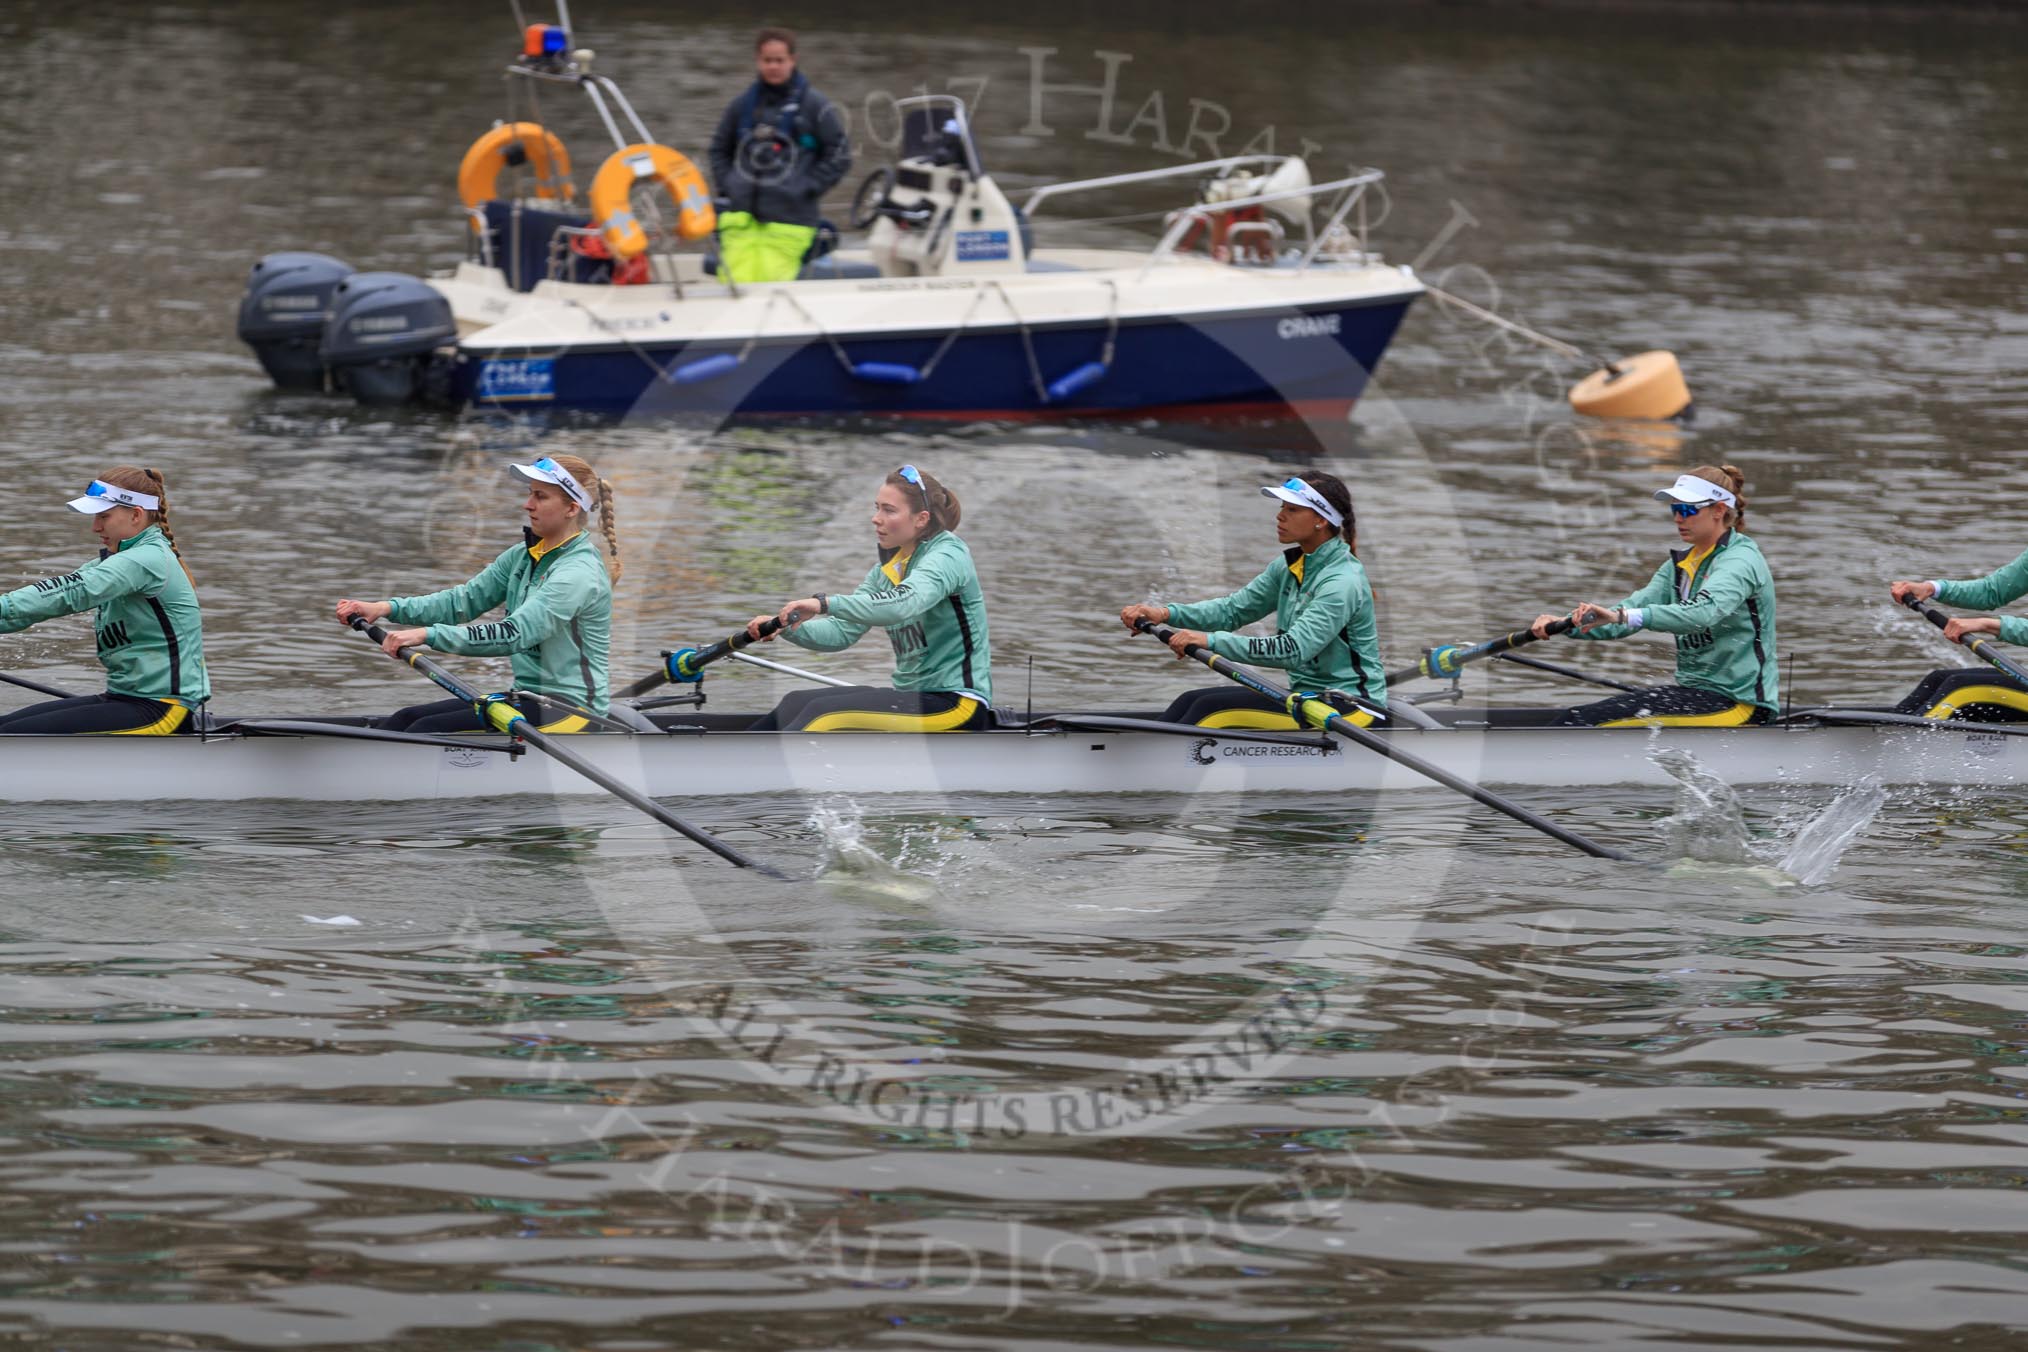 The Cancer Research UK Women's Boat Race 2018: The Cambridge reserve boat Blondie, here  stroke Millie Perrin, 7 Lucy Pike, 6 Larkin Sayre, 5 Daphne Martschenko, 4 Laura Foster, 3 Anne Beenken.
River Thames between Putney Bridge and Mortlake,
London SW15,

United Kingdom,
on 24 March 2018 at 16:03, image #138